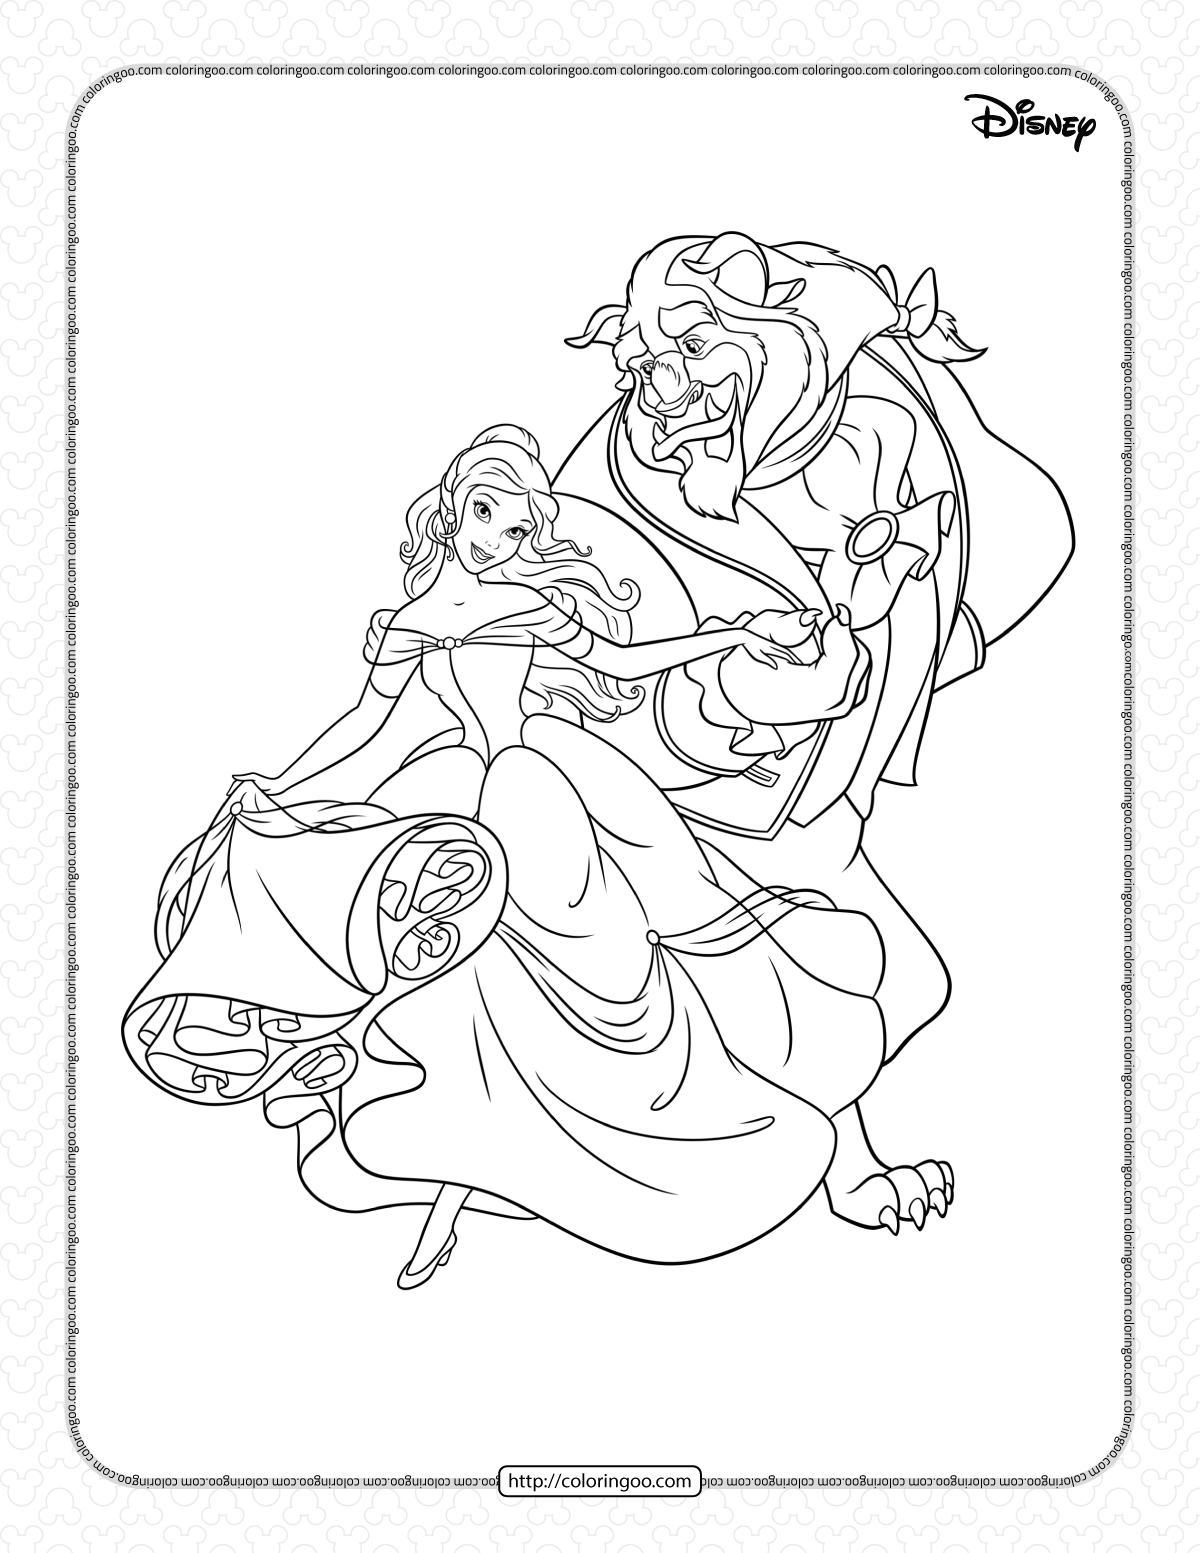 beauty and the beast ready to dance coloring page